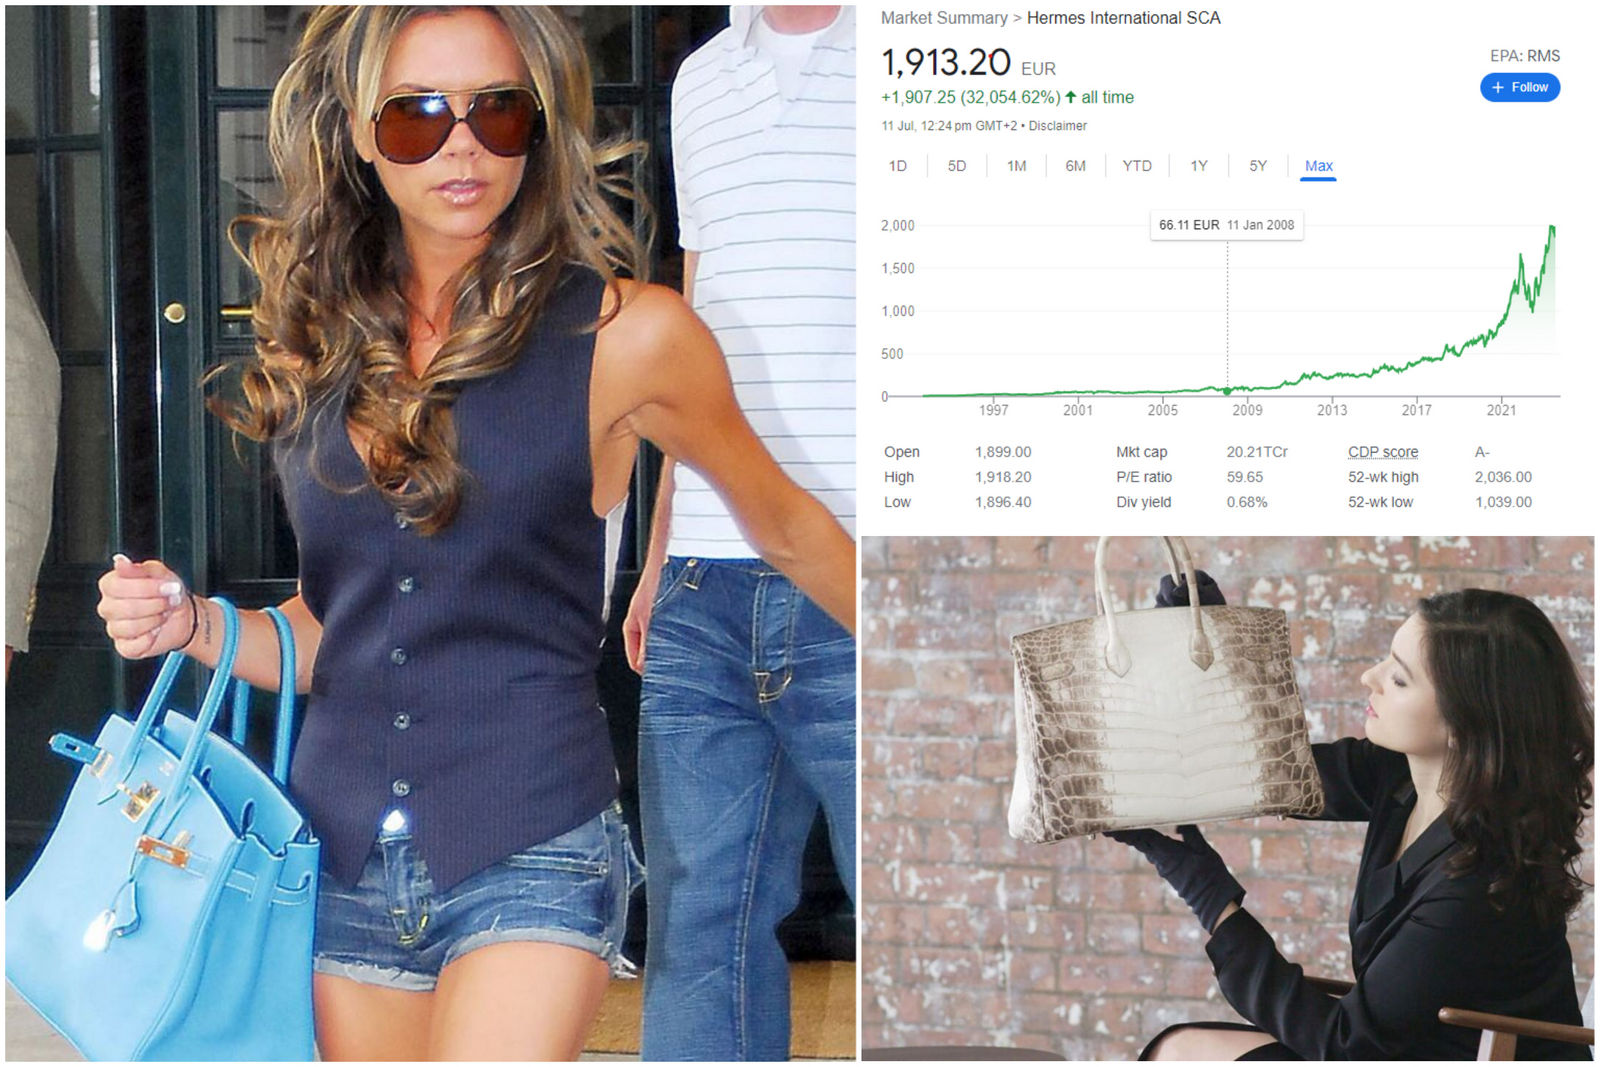 16 years ago, if Victoria Beckham had invested in Hermes shares